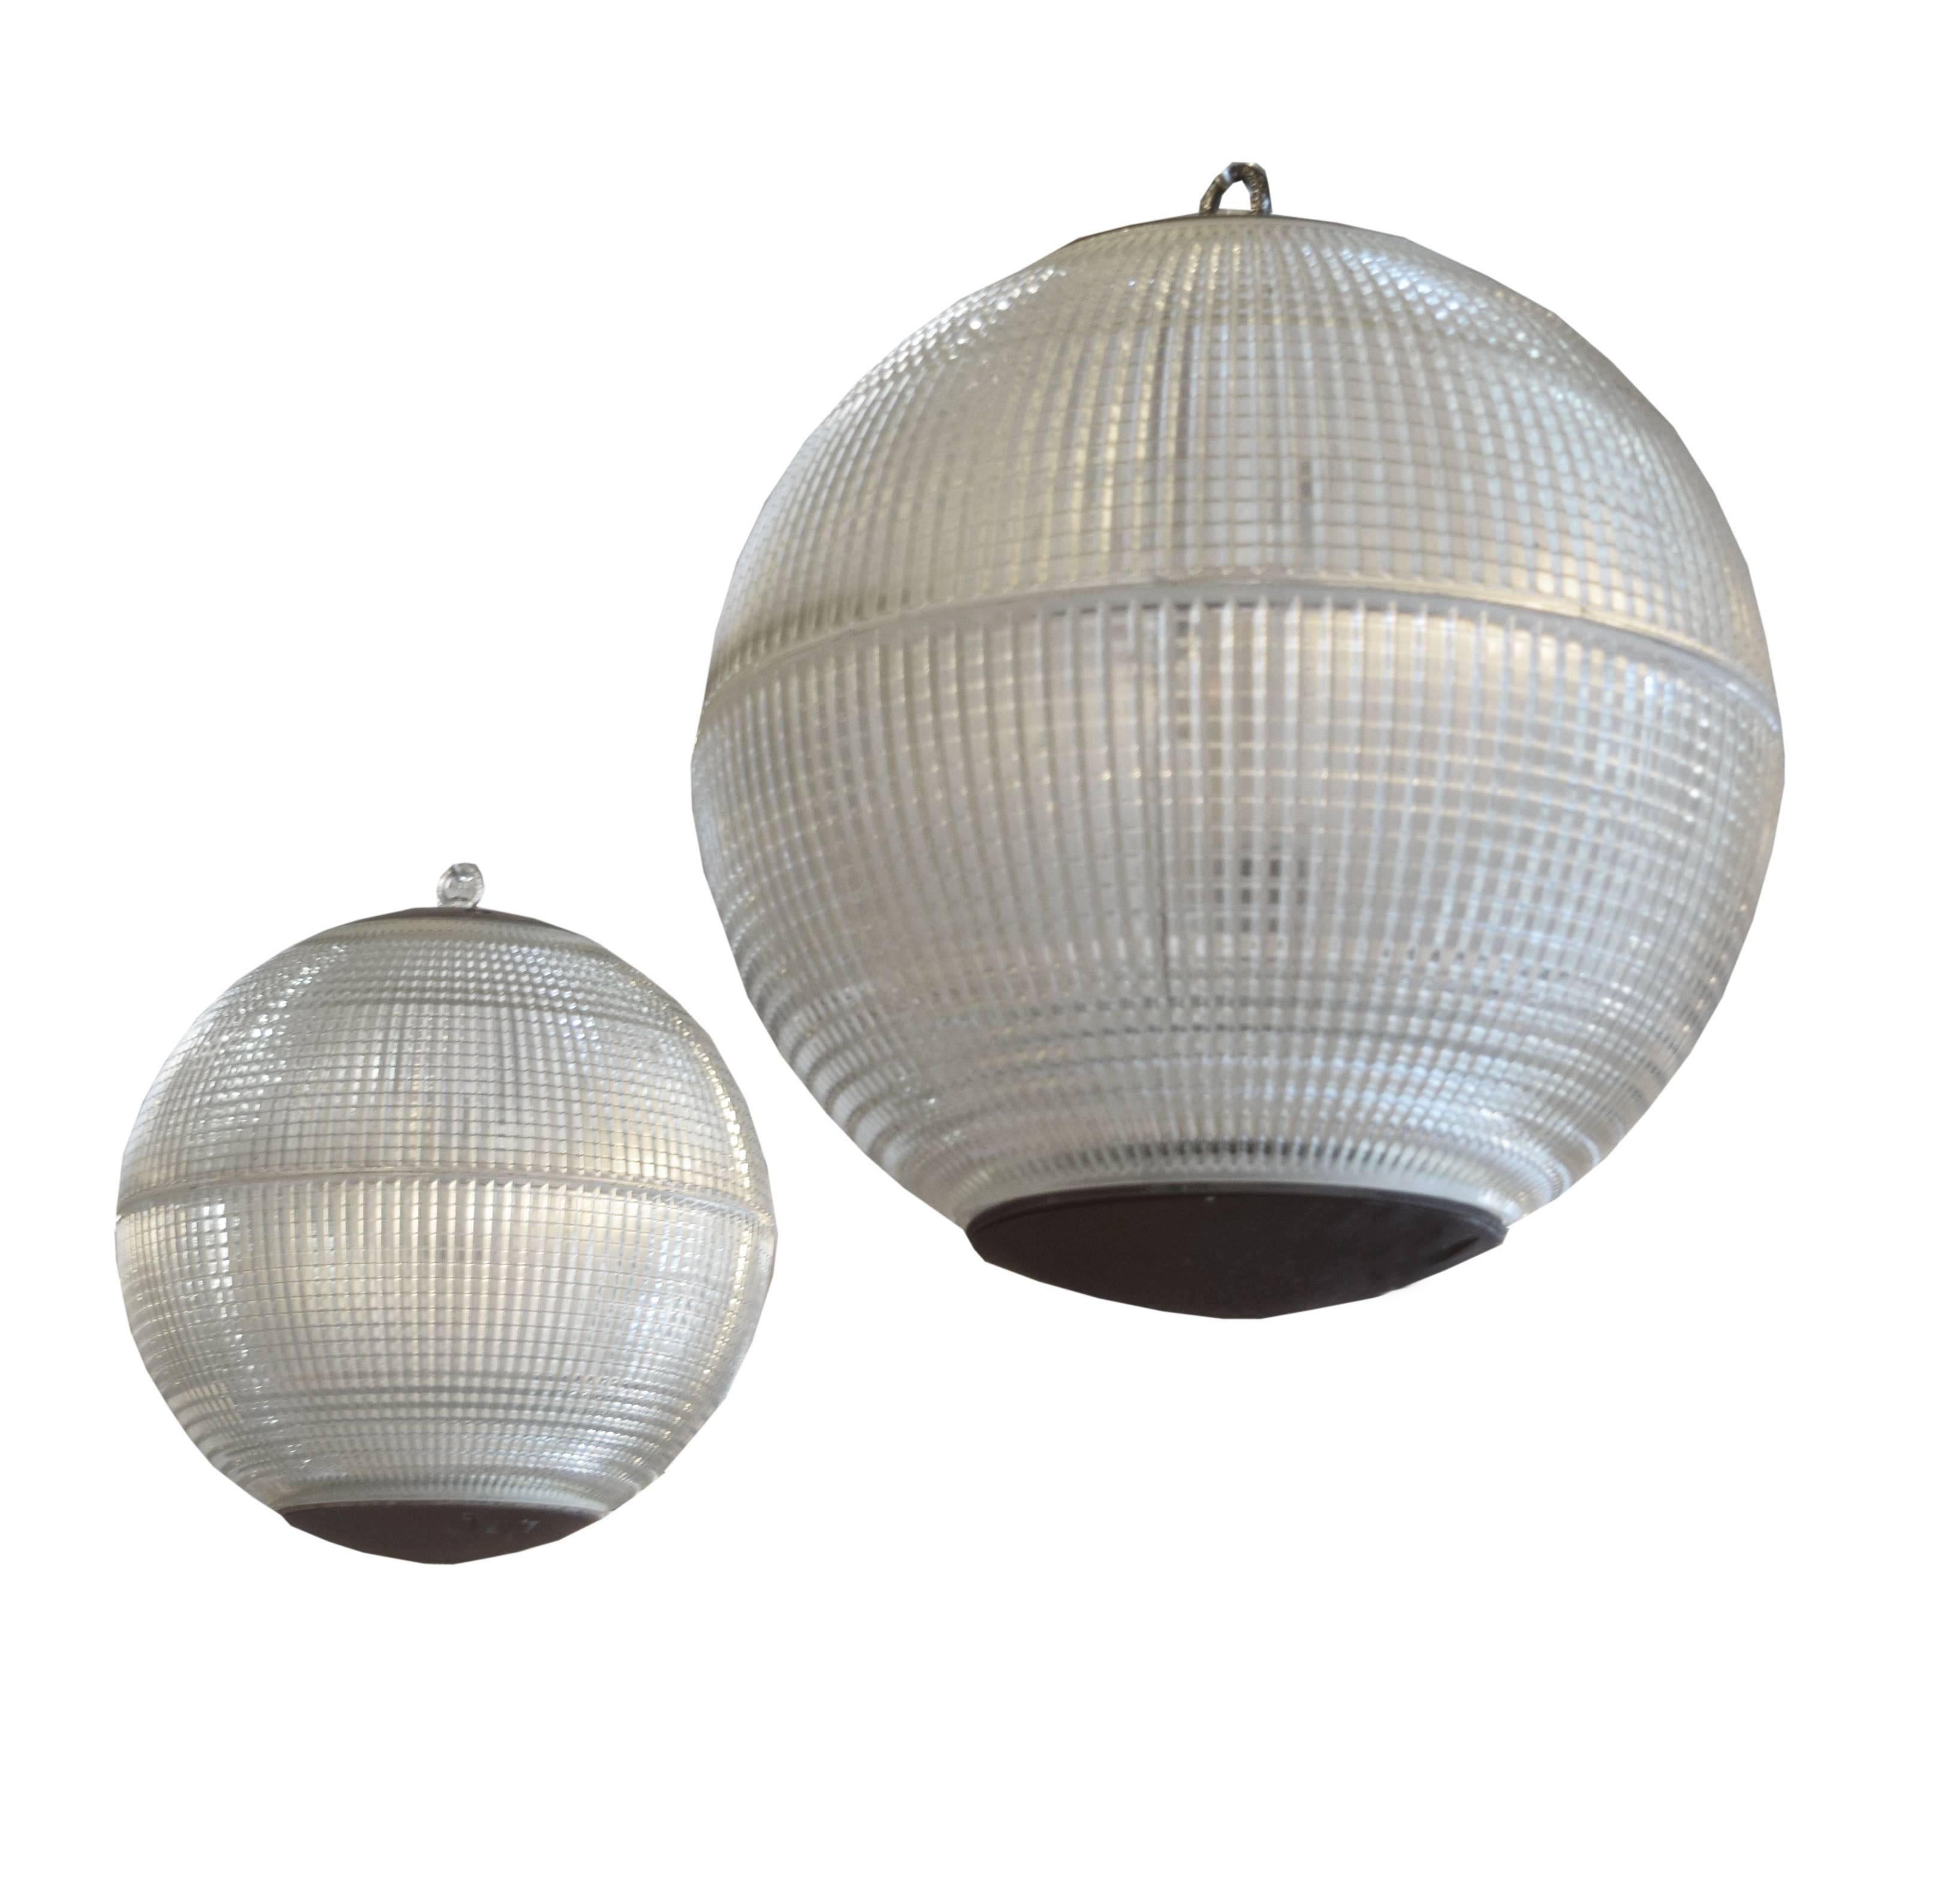 Spherical Holophane pendant, originally from a street light in Paris, France with prismatic glass shades that provide a combination of even uplight and downlight, circa 1960.

Require re-wiring.